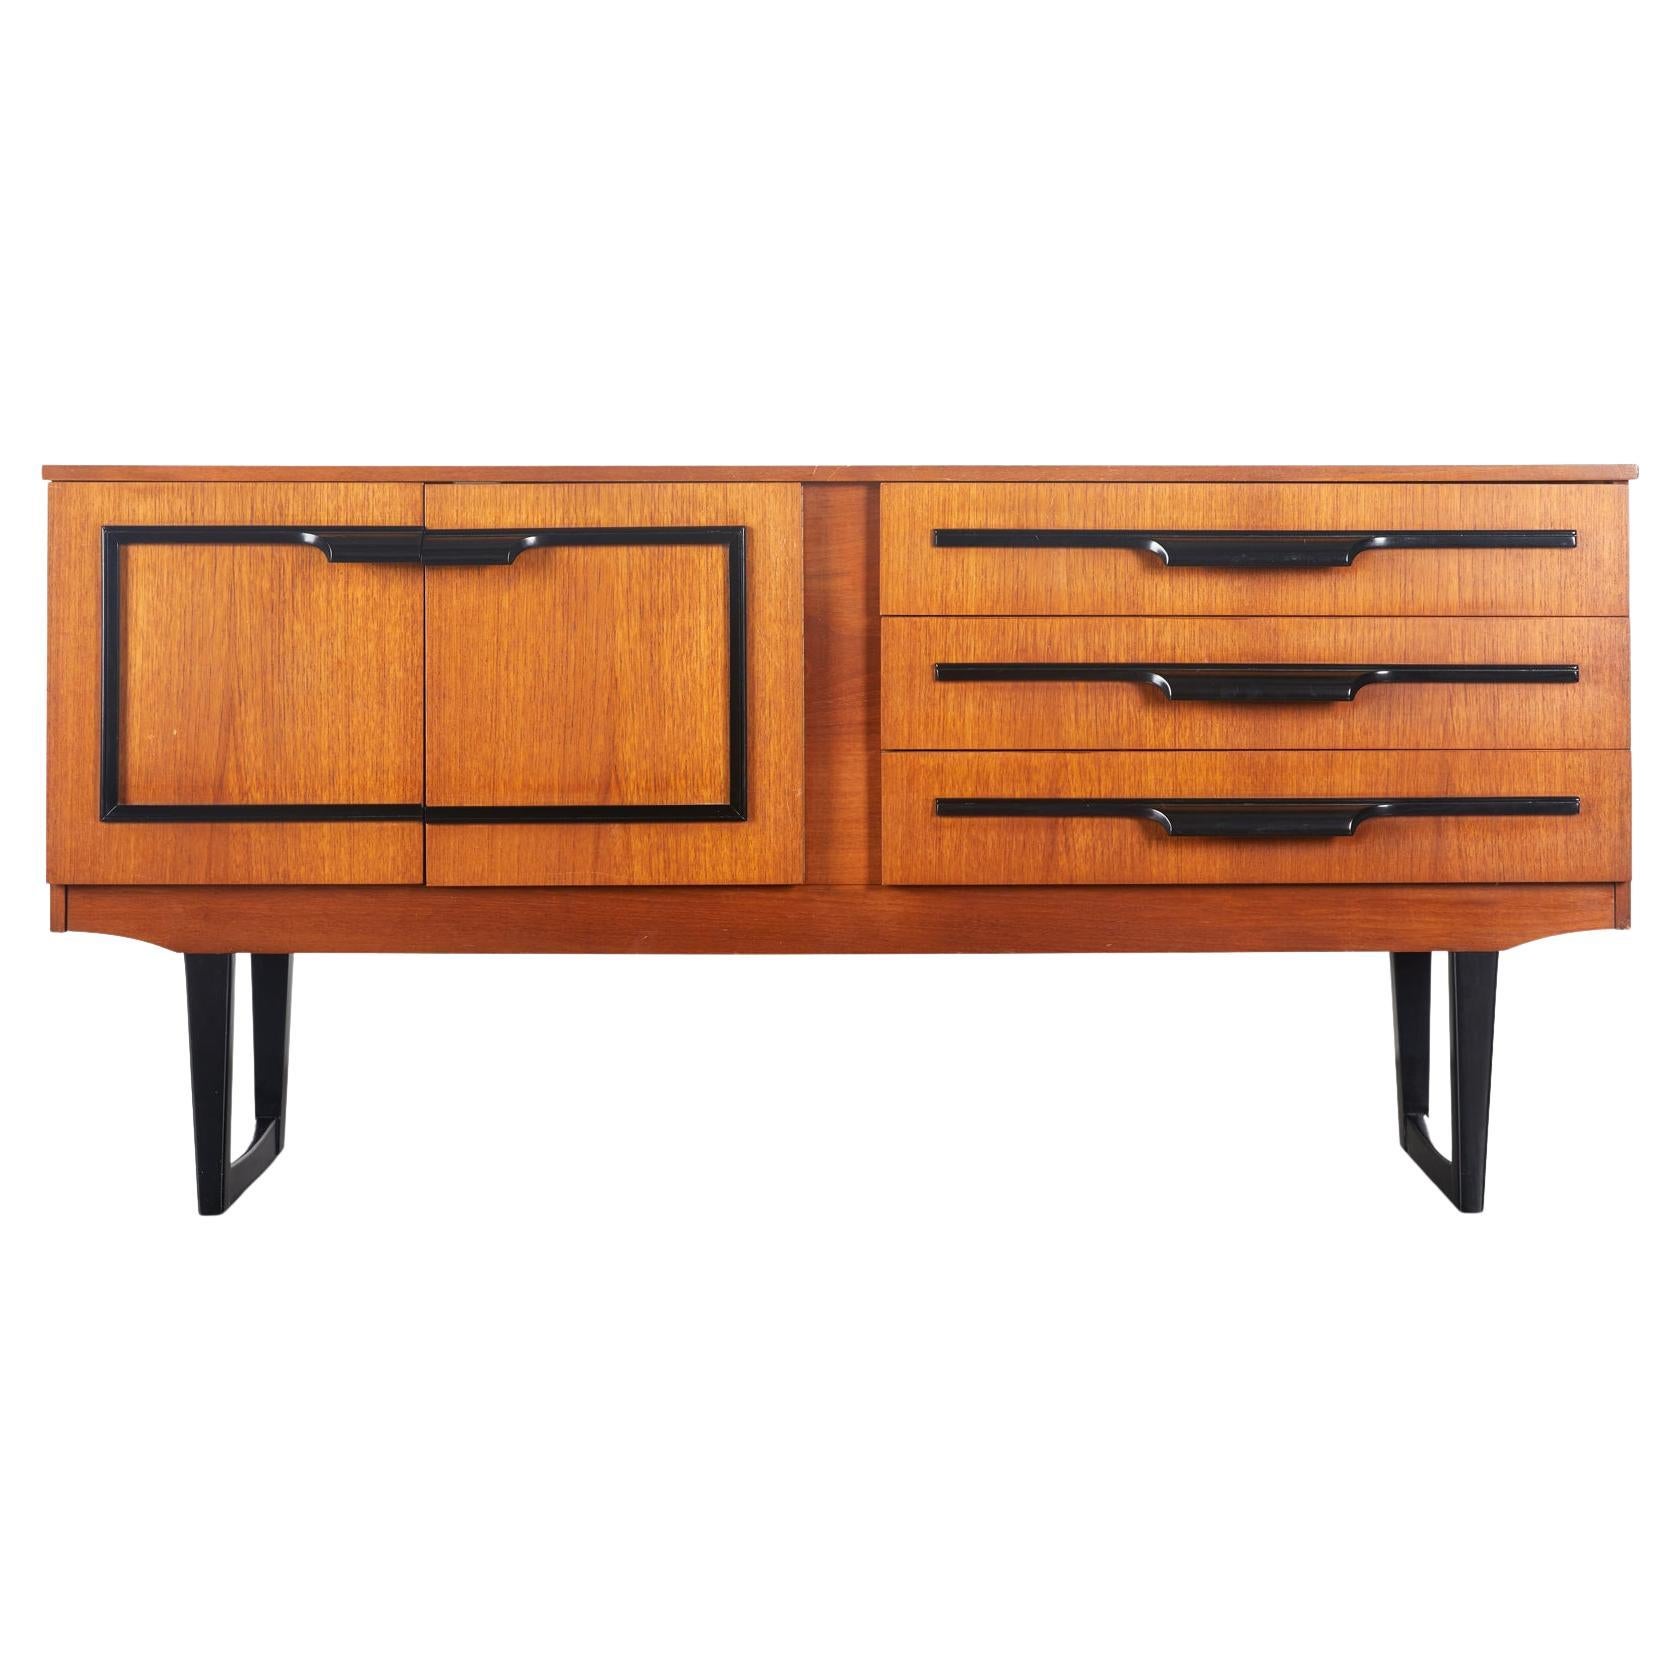 English Modern Midcentury Credenza in Teak with Black Lacquer Accents For Sale